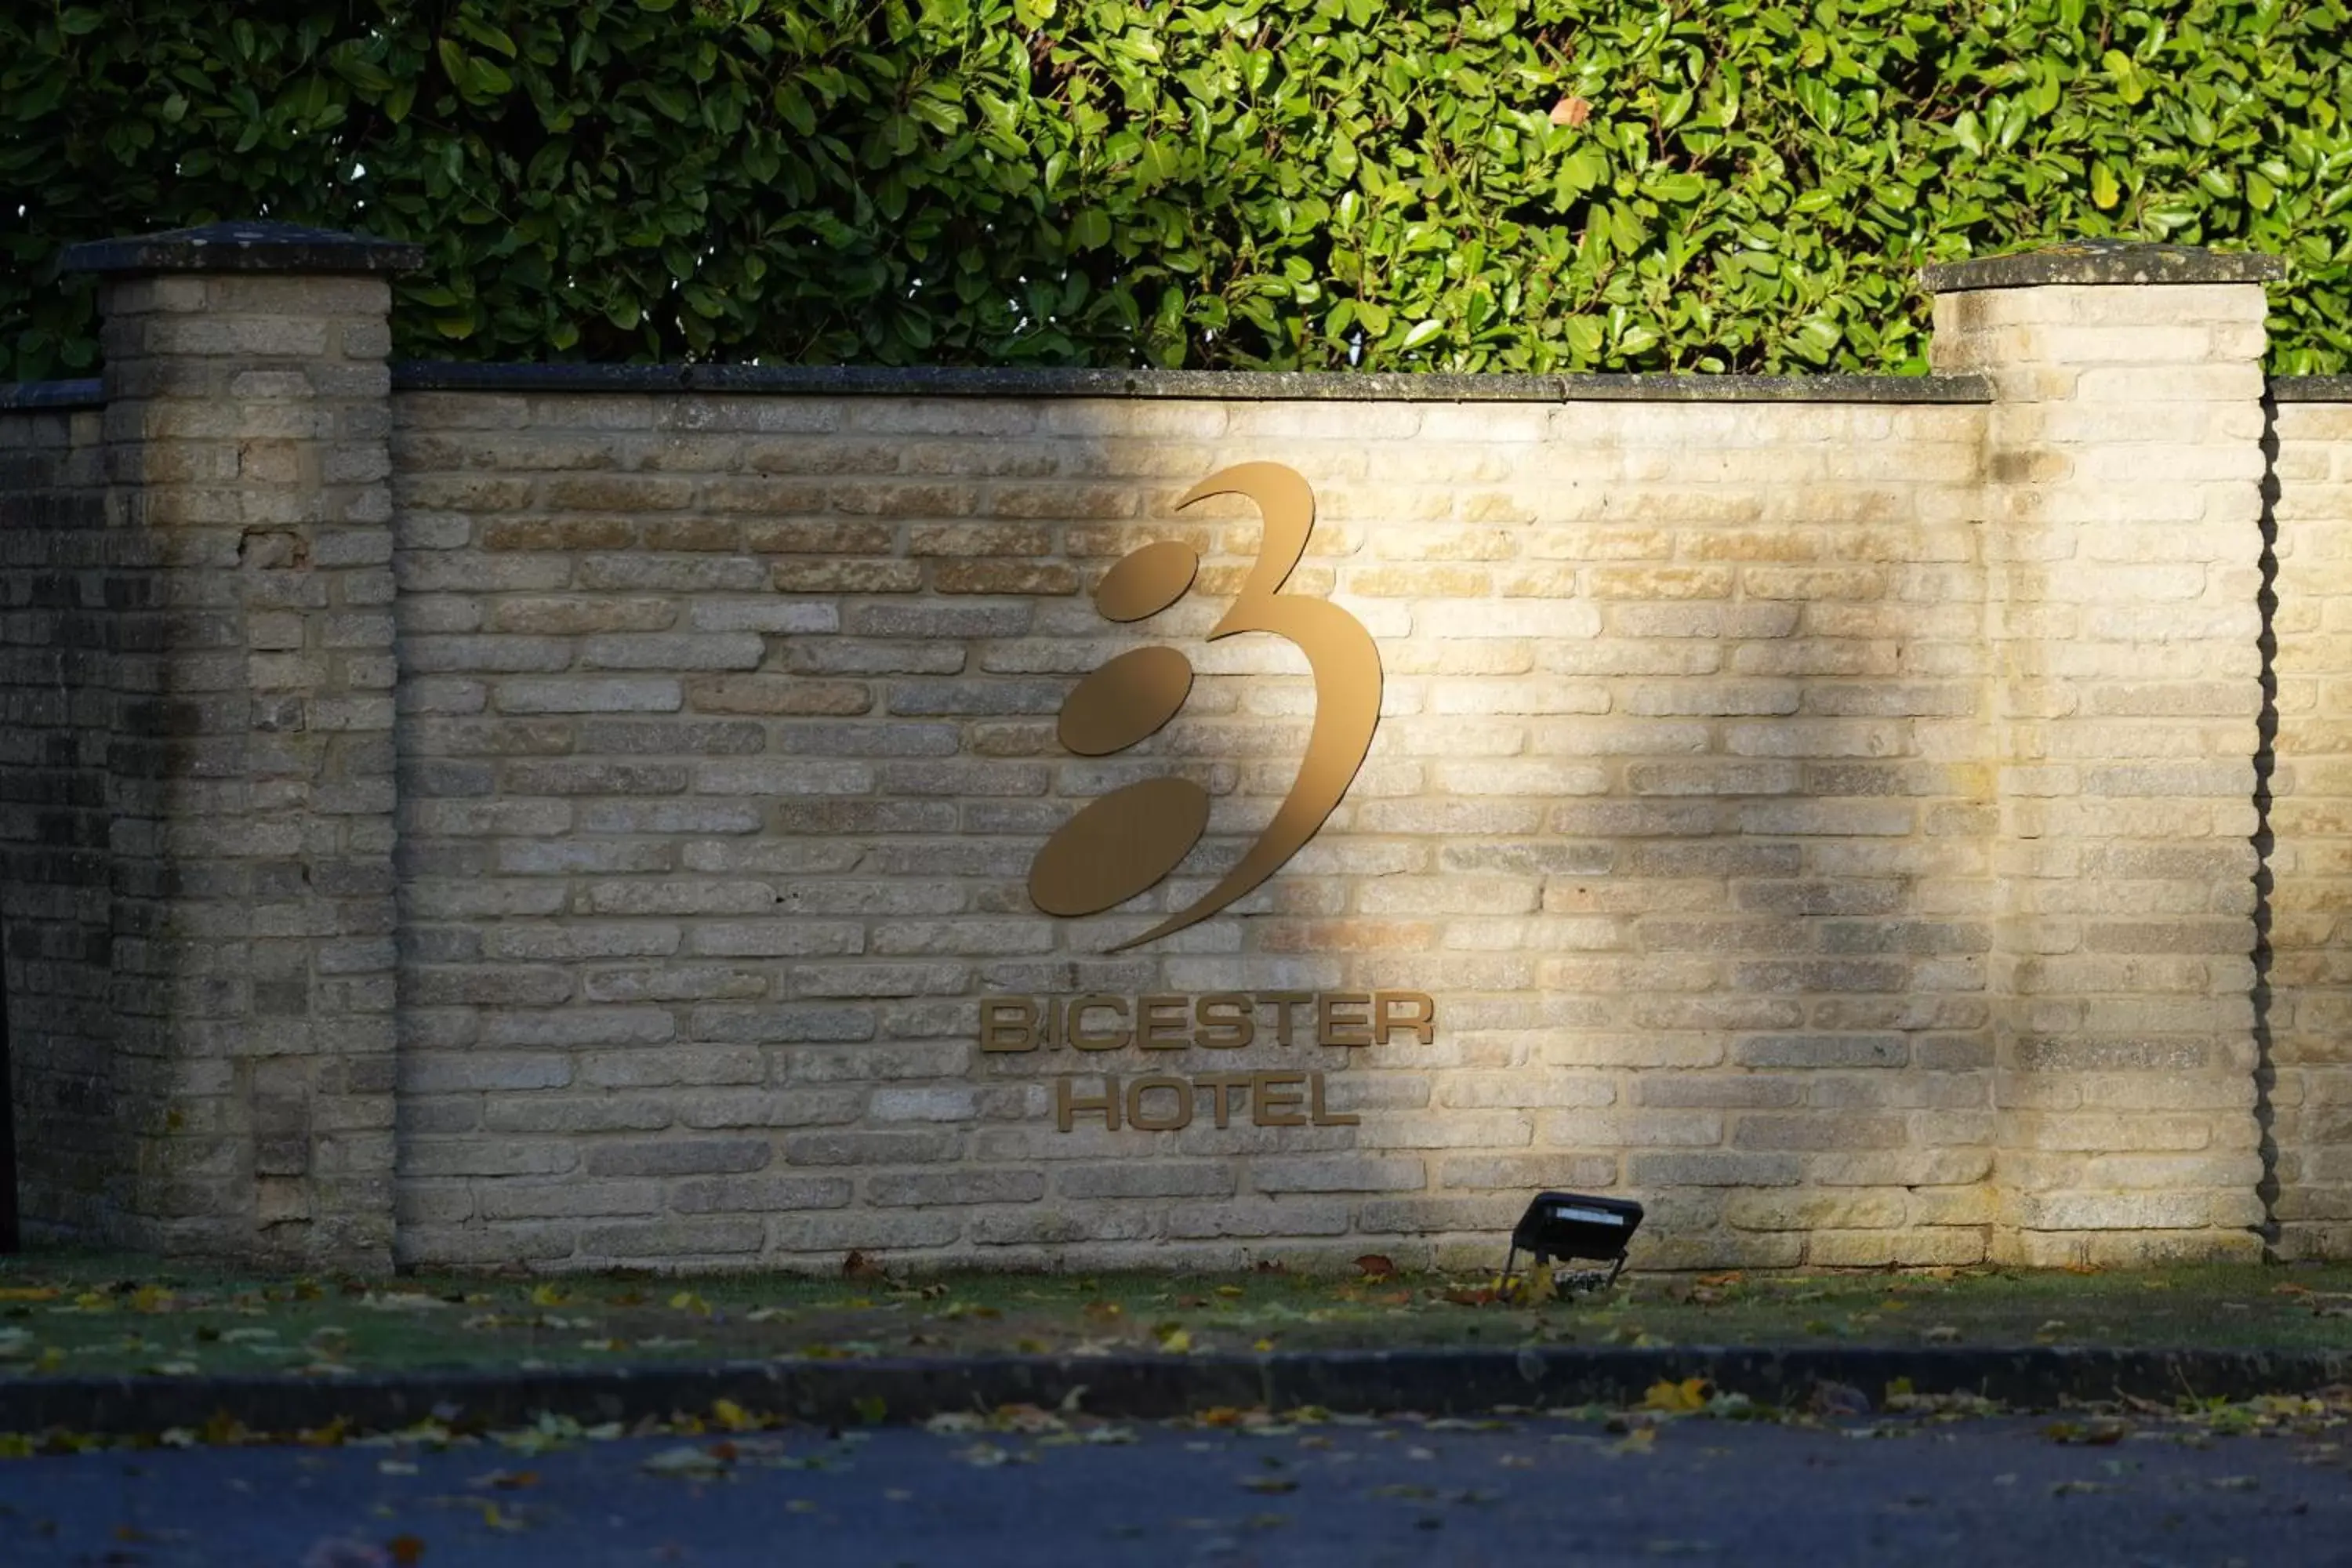 Property logo or sign in Bicester Hotel, Golf & Spa